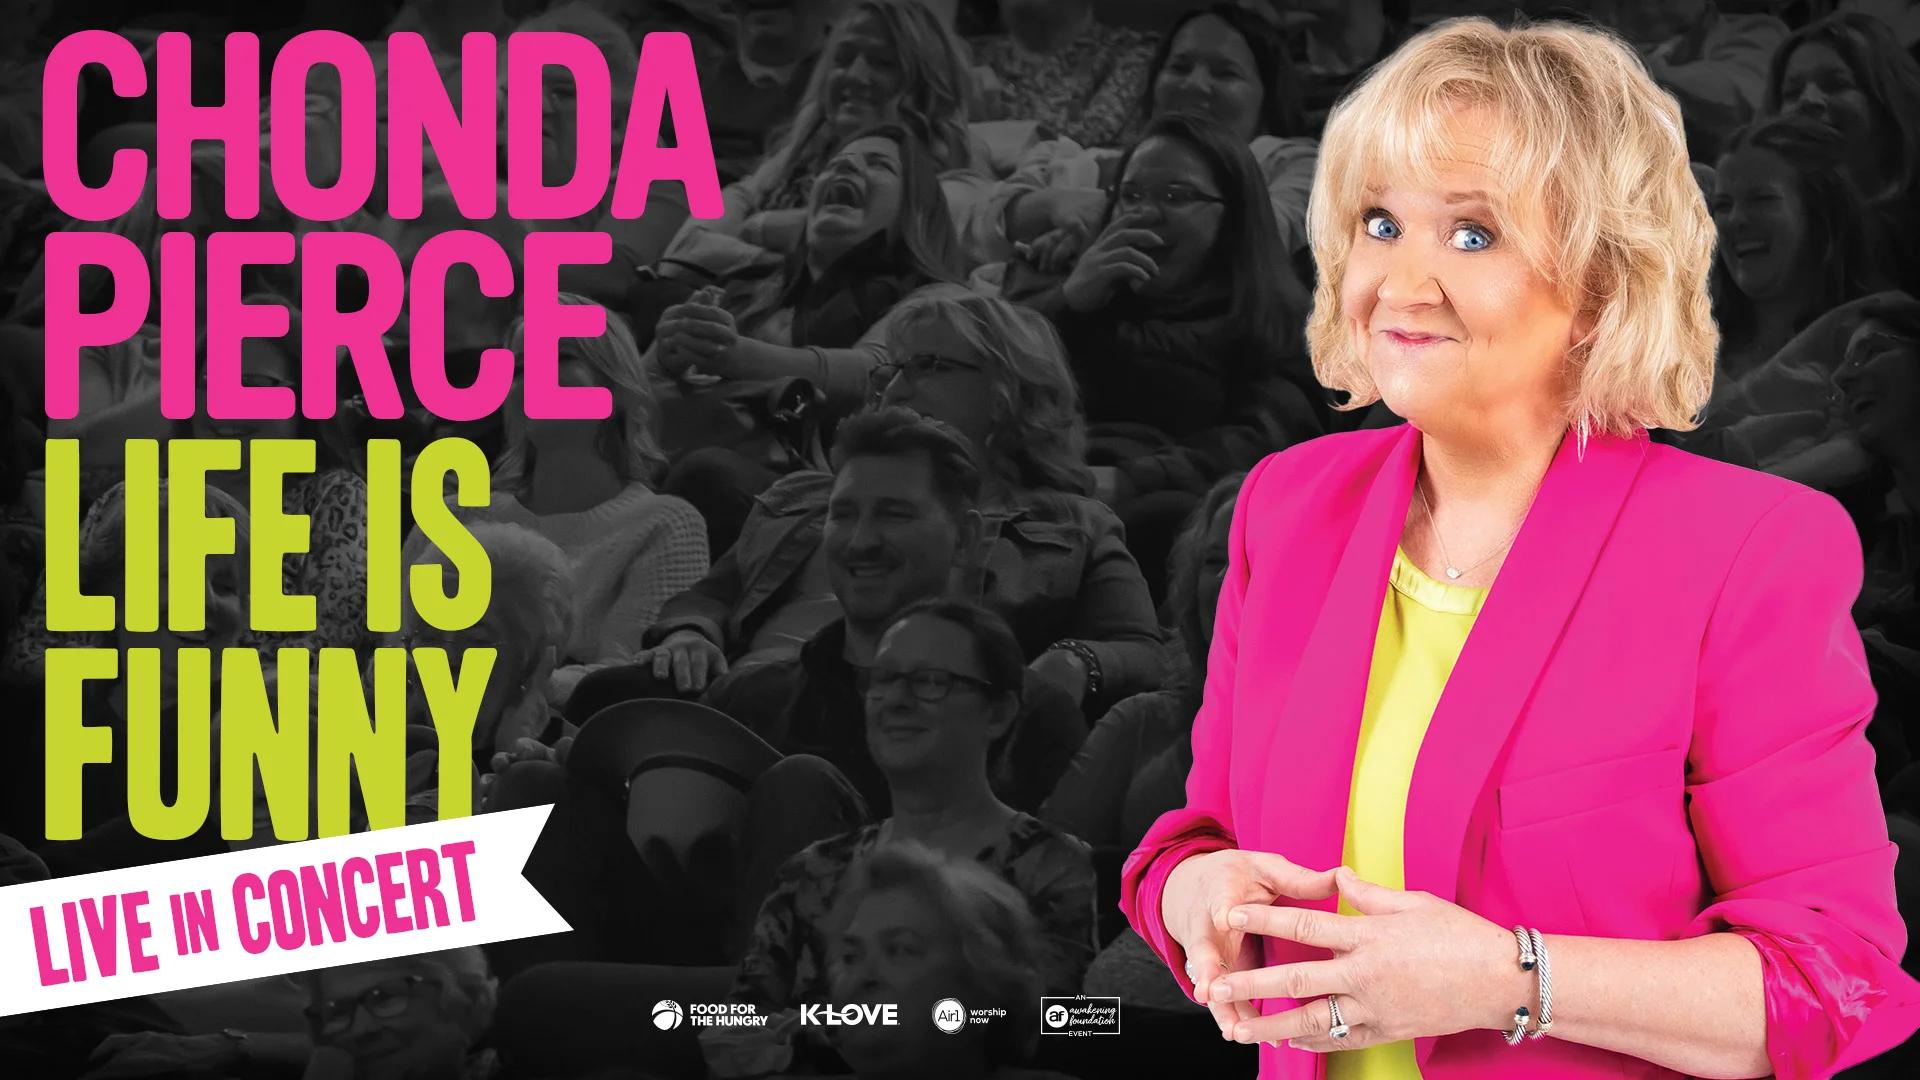 Chonda Pierce's Life is Funny: Live in Concert